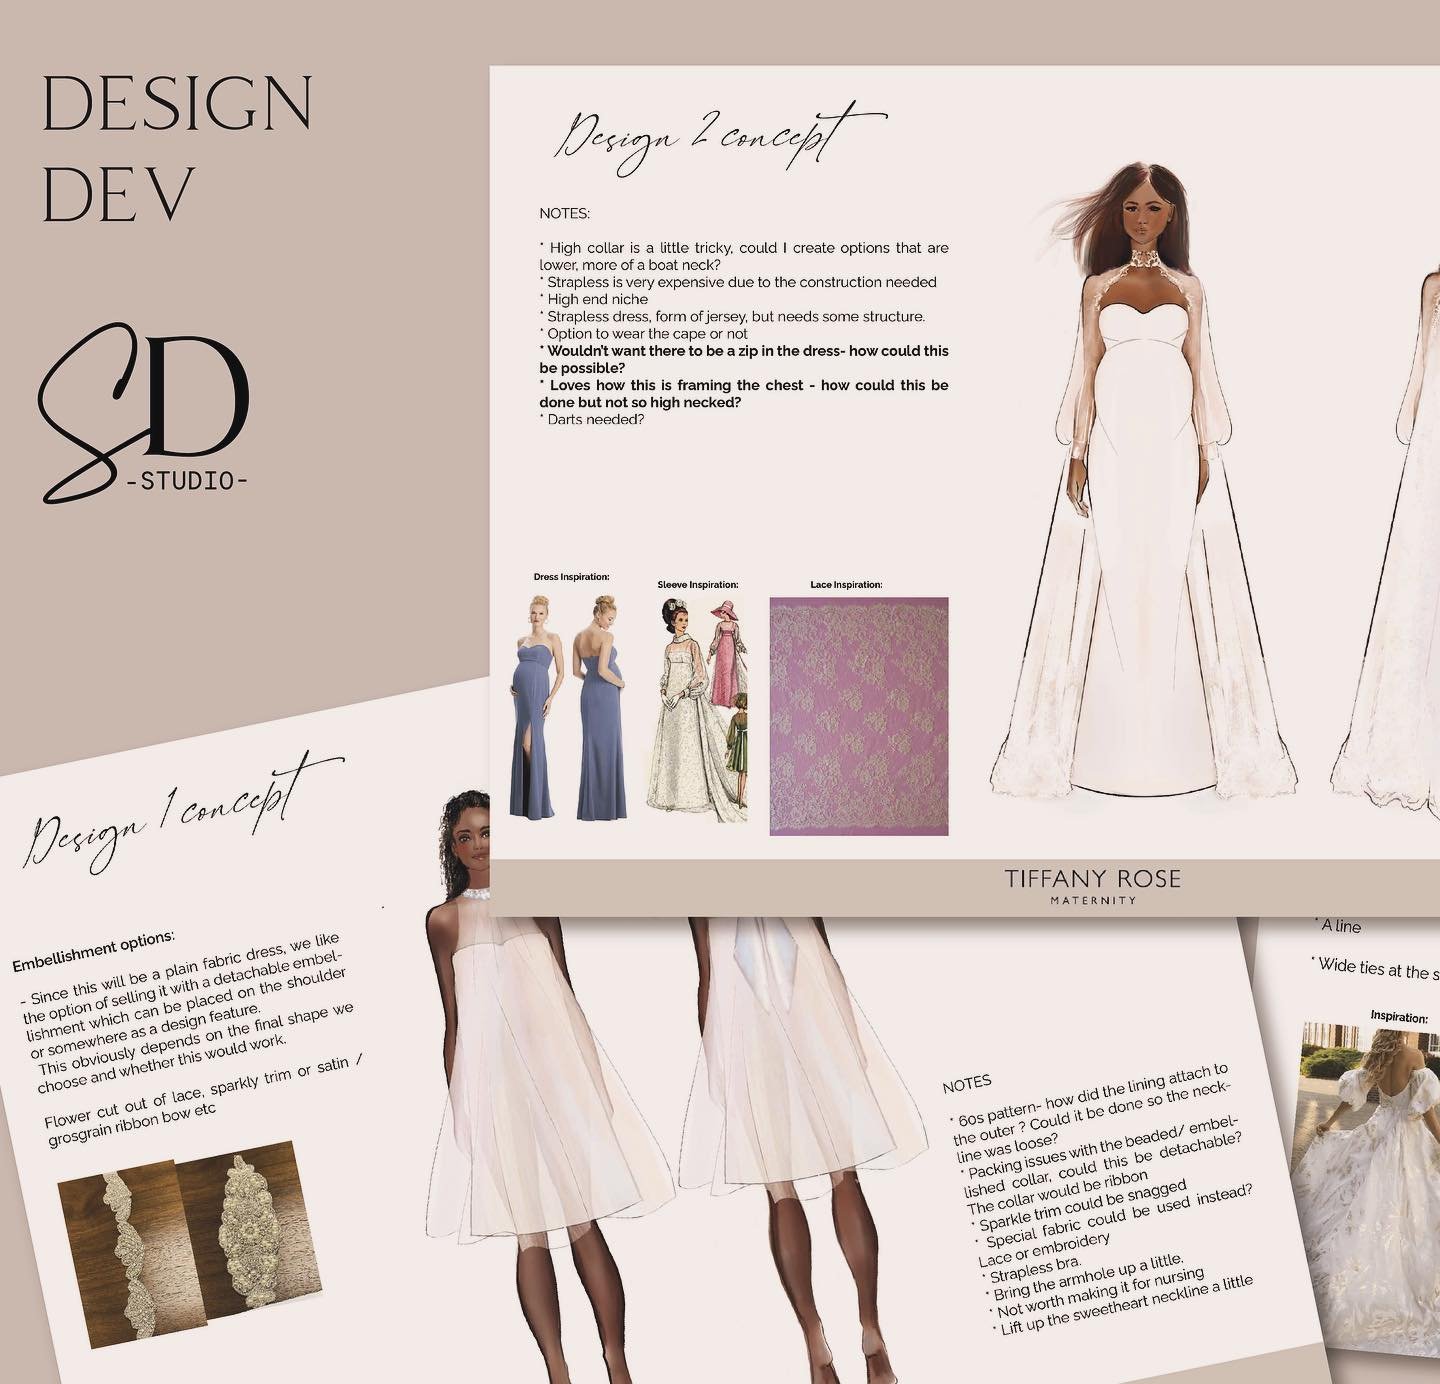 Twirling into #weddingseason&hellip;💍💒

Some #bridal design work created for a previous client, who requested styles for #pregnantbrides that could be perfect for sunny registry weddings or ecaspism elopement&rsquo;s. 

We wanted to achieve a timel